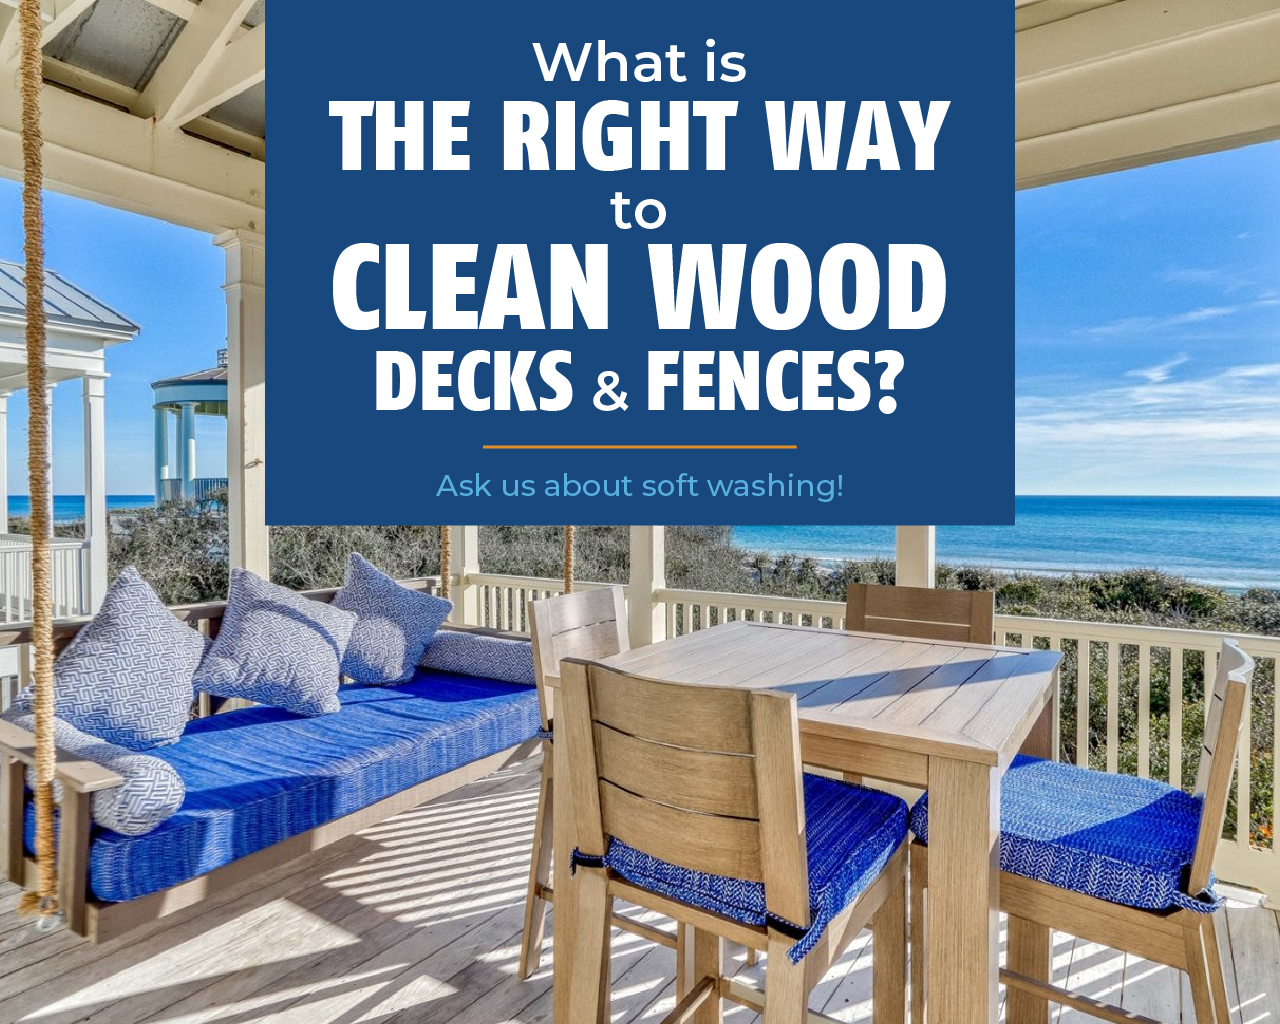 What is the right way to clean wood decks and fences?